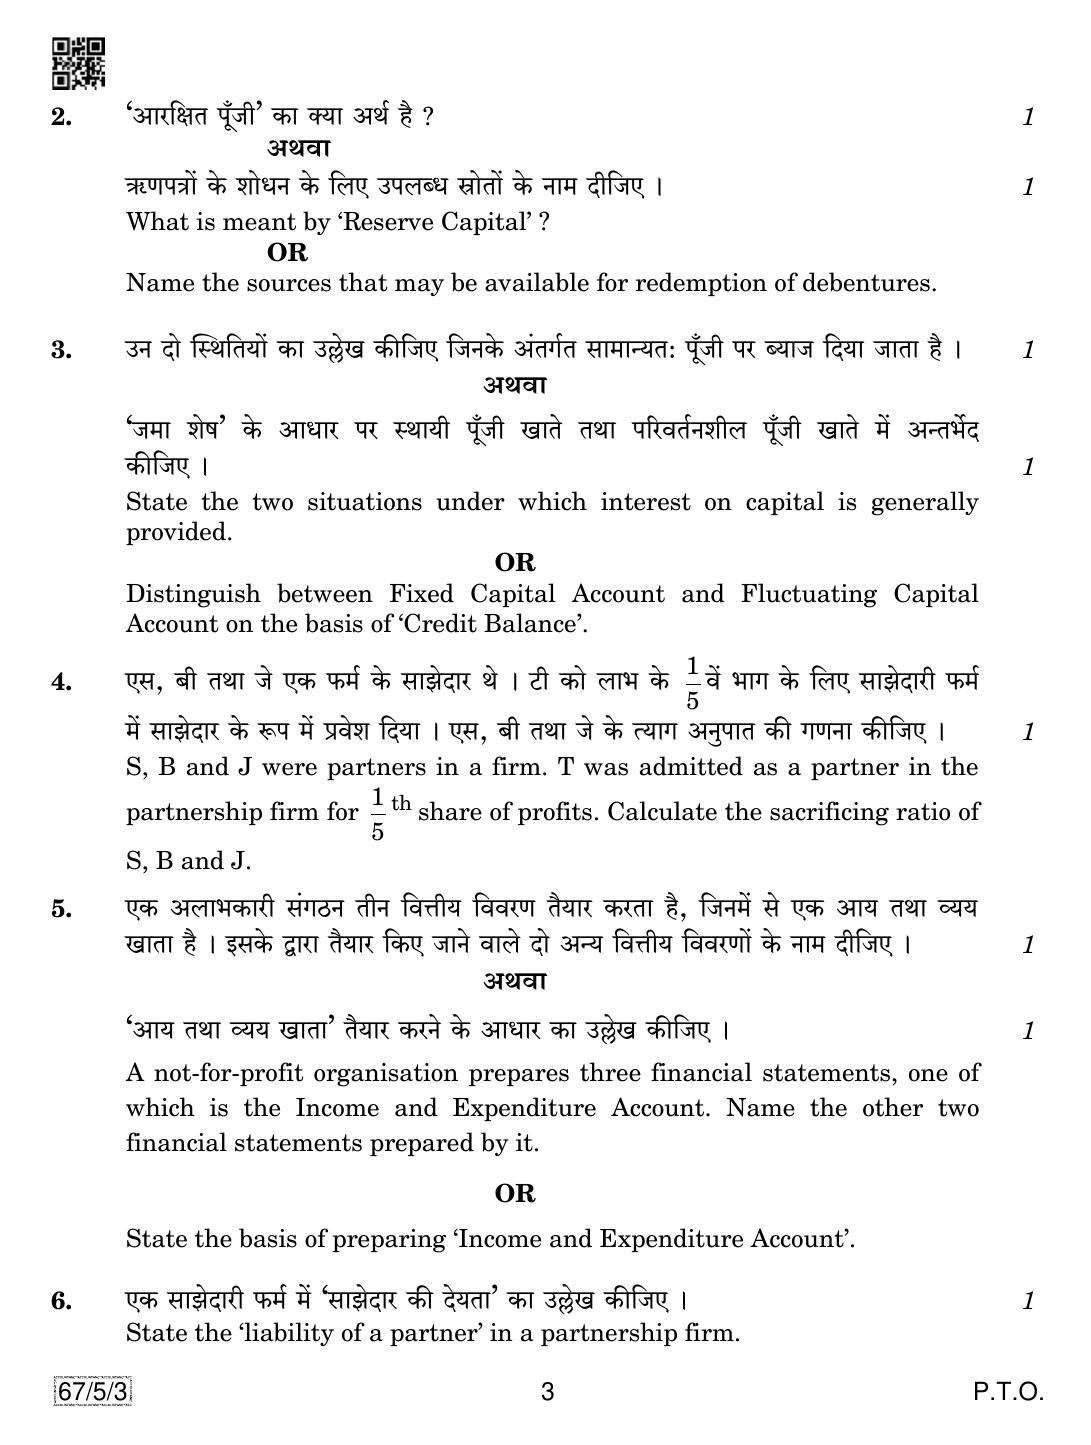 CBSE Class 12 67-5-3 Accountancy 2019 Question Paper - Page 3